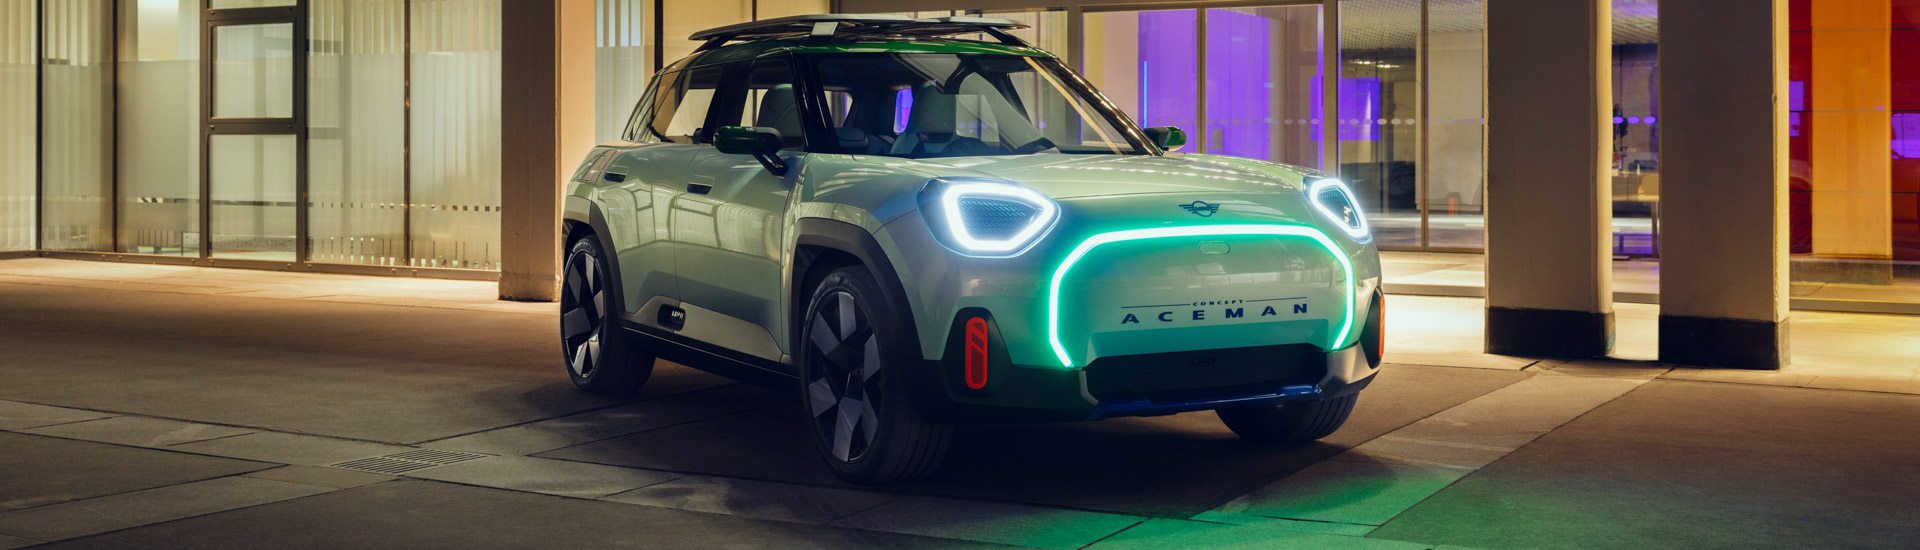 Mini Aceman Concept Previews Brand's First Electric Crossover